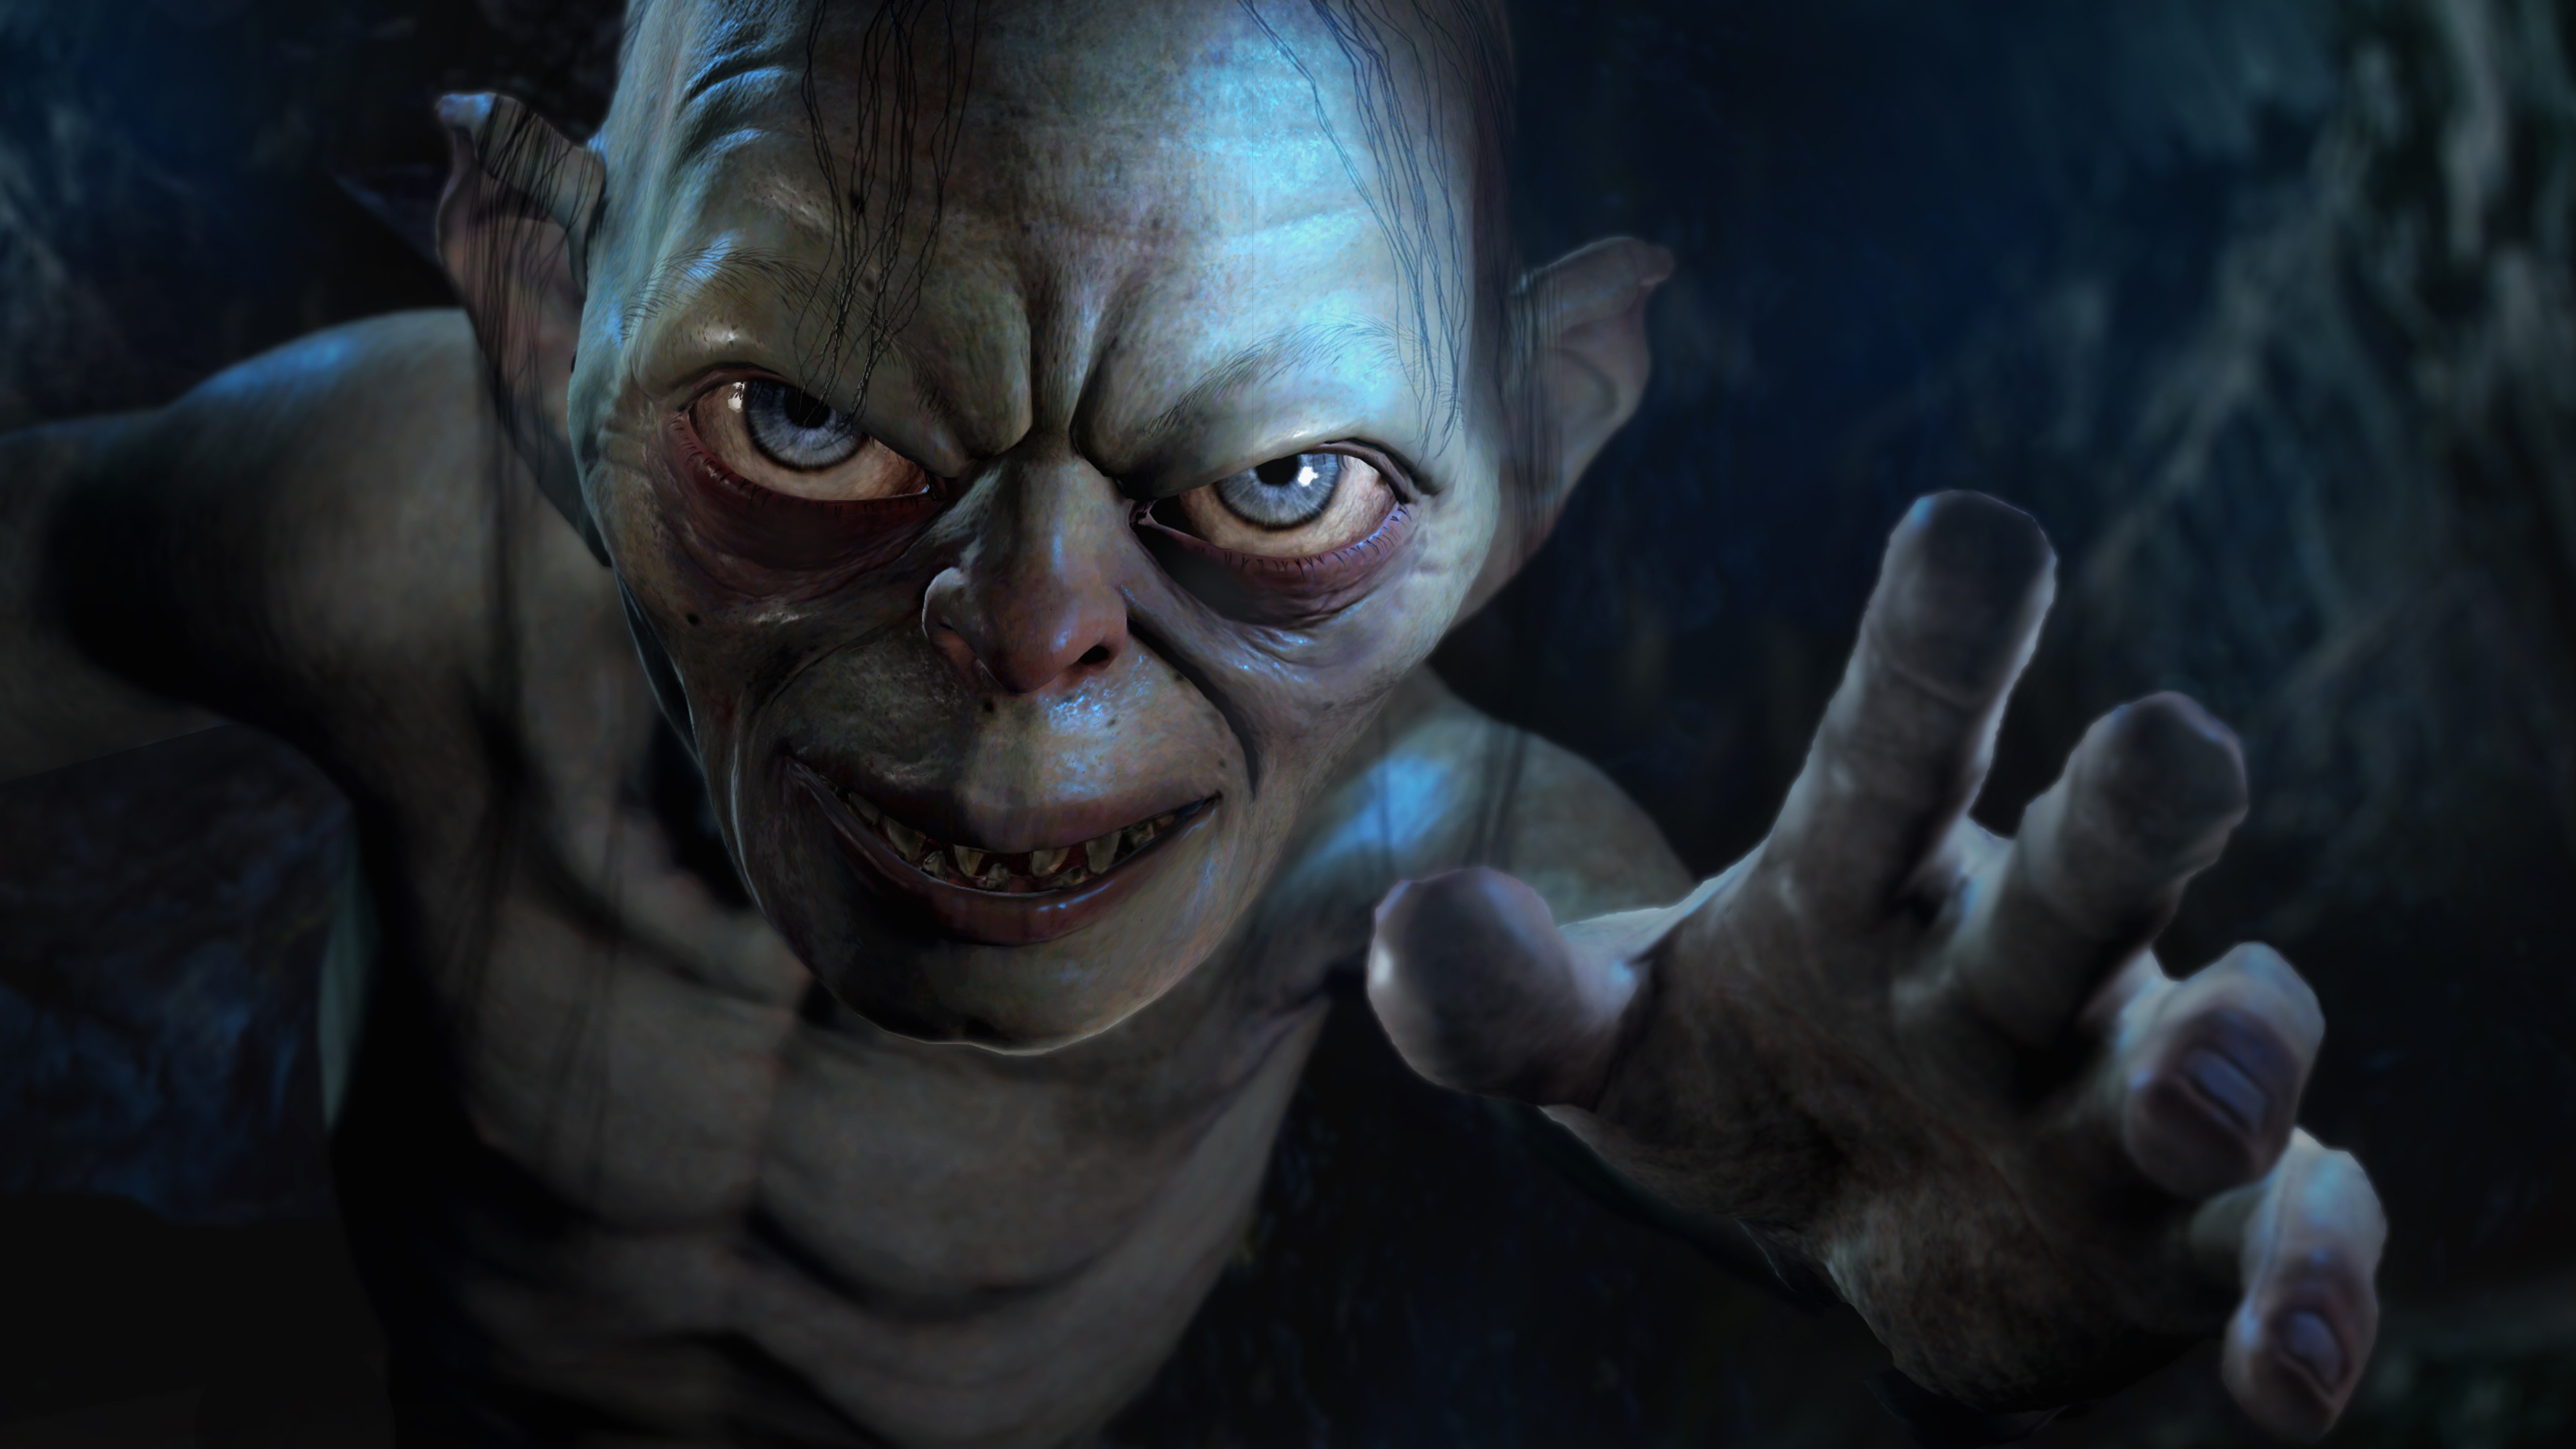 Middle earth: Shadow Of Mordor, Gollum, Video Games Wallpaper